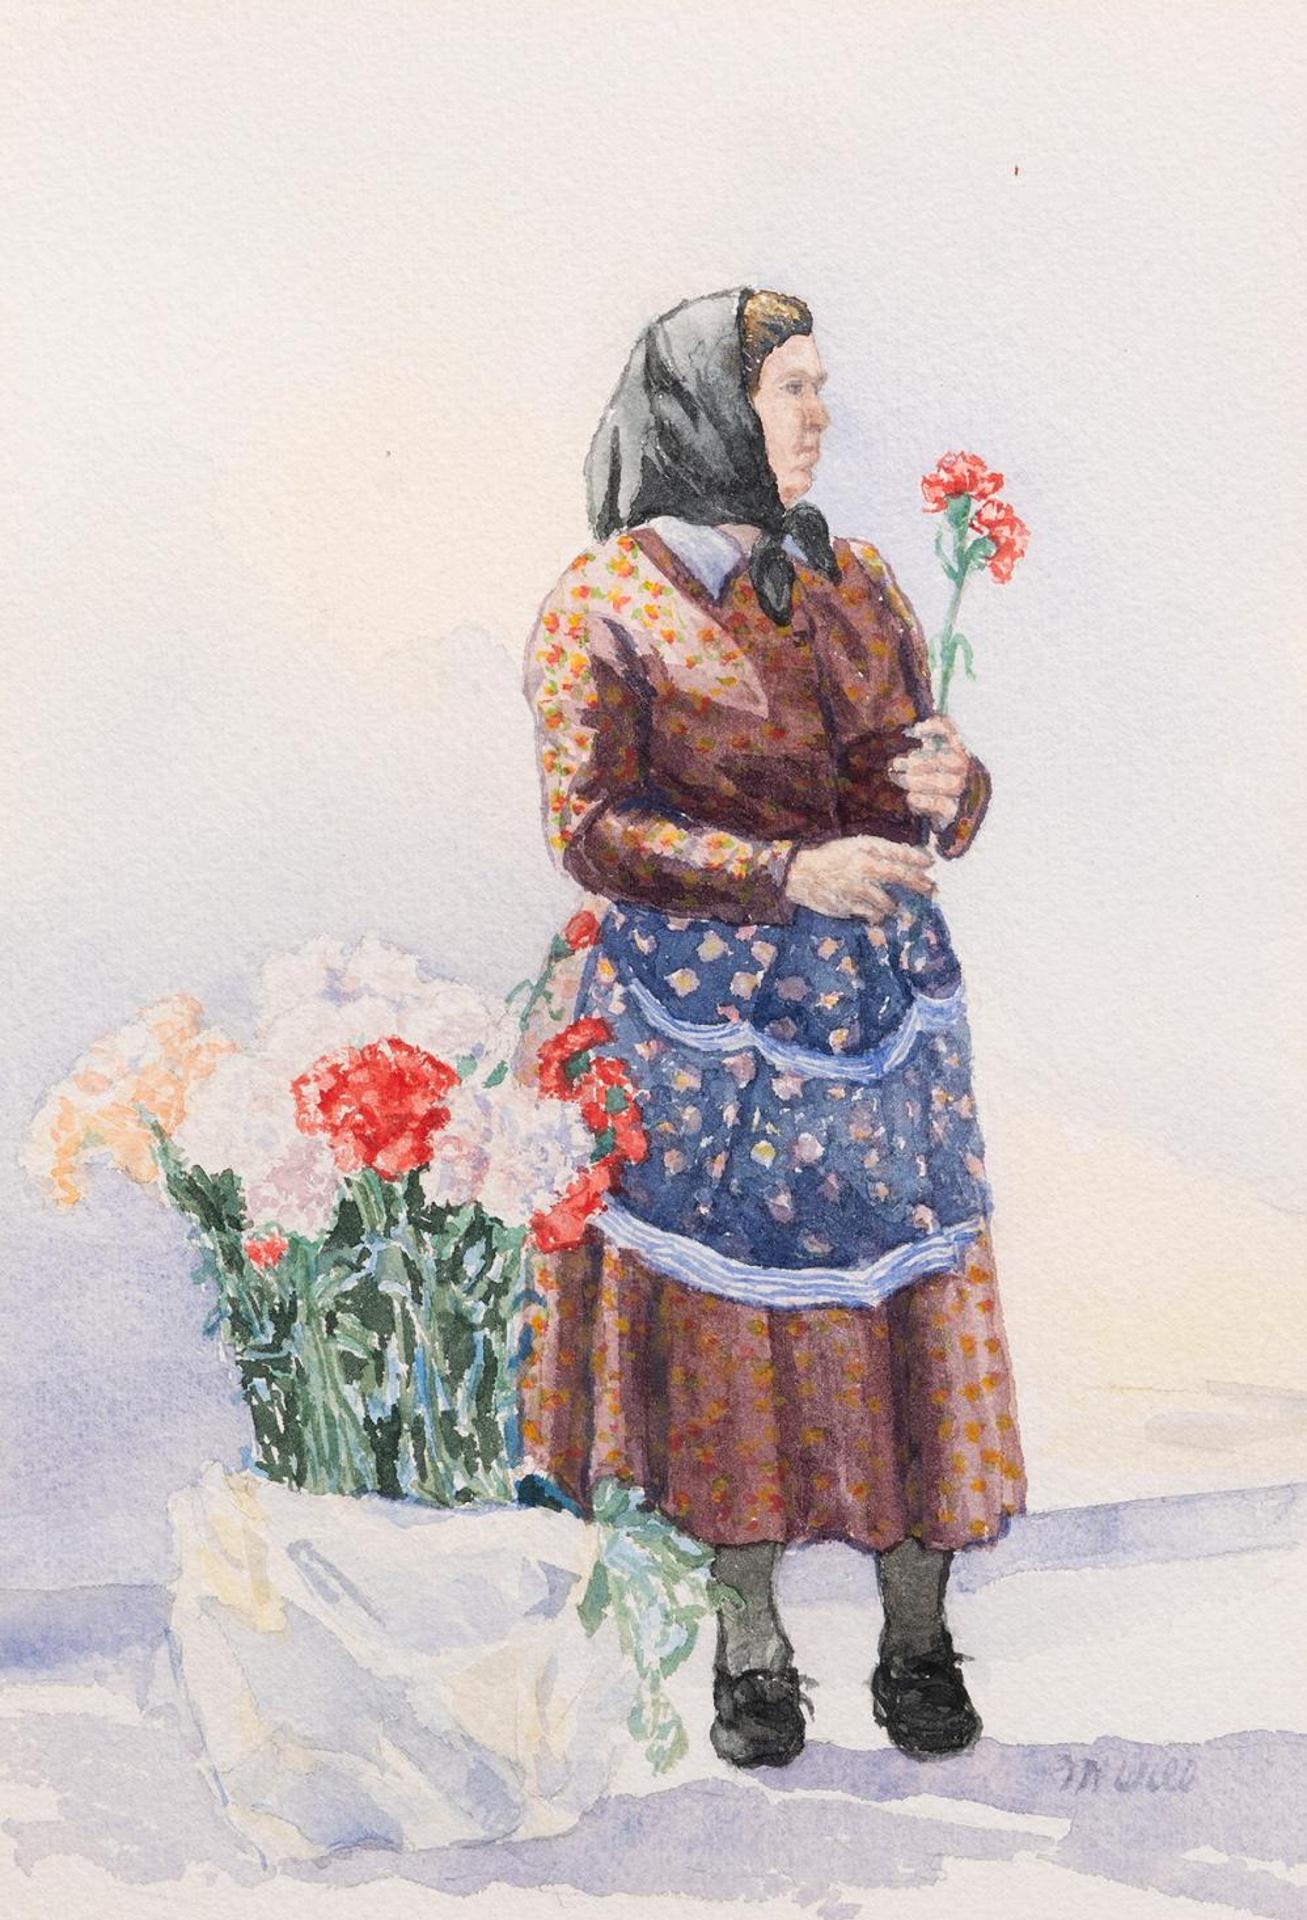 Marjorie Will (1930-2019) - Untitled - Woman Selling Carnations